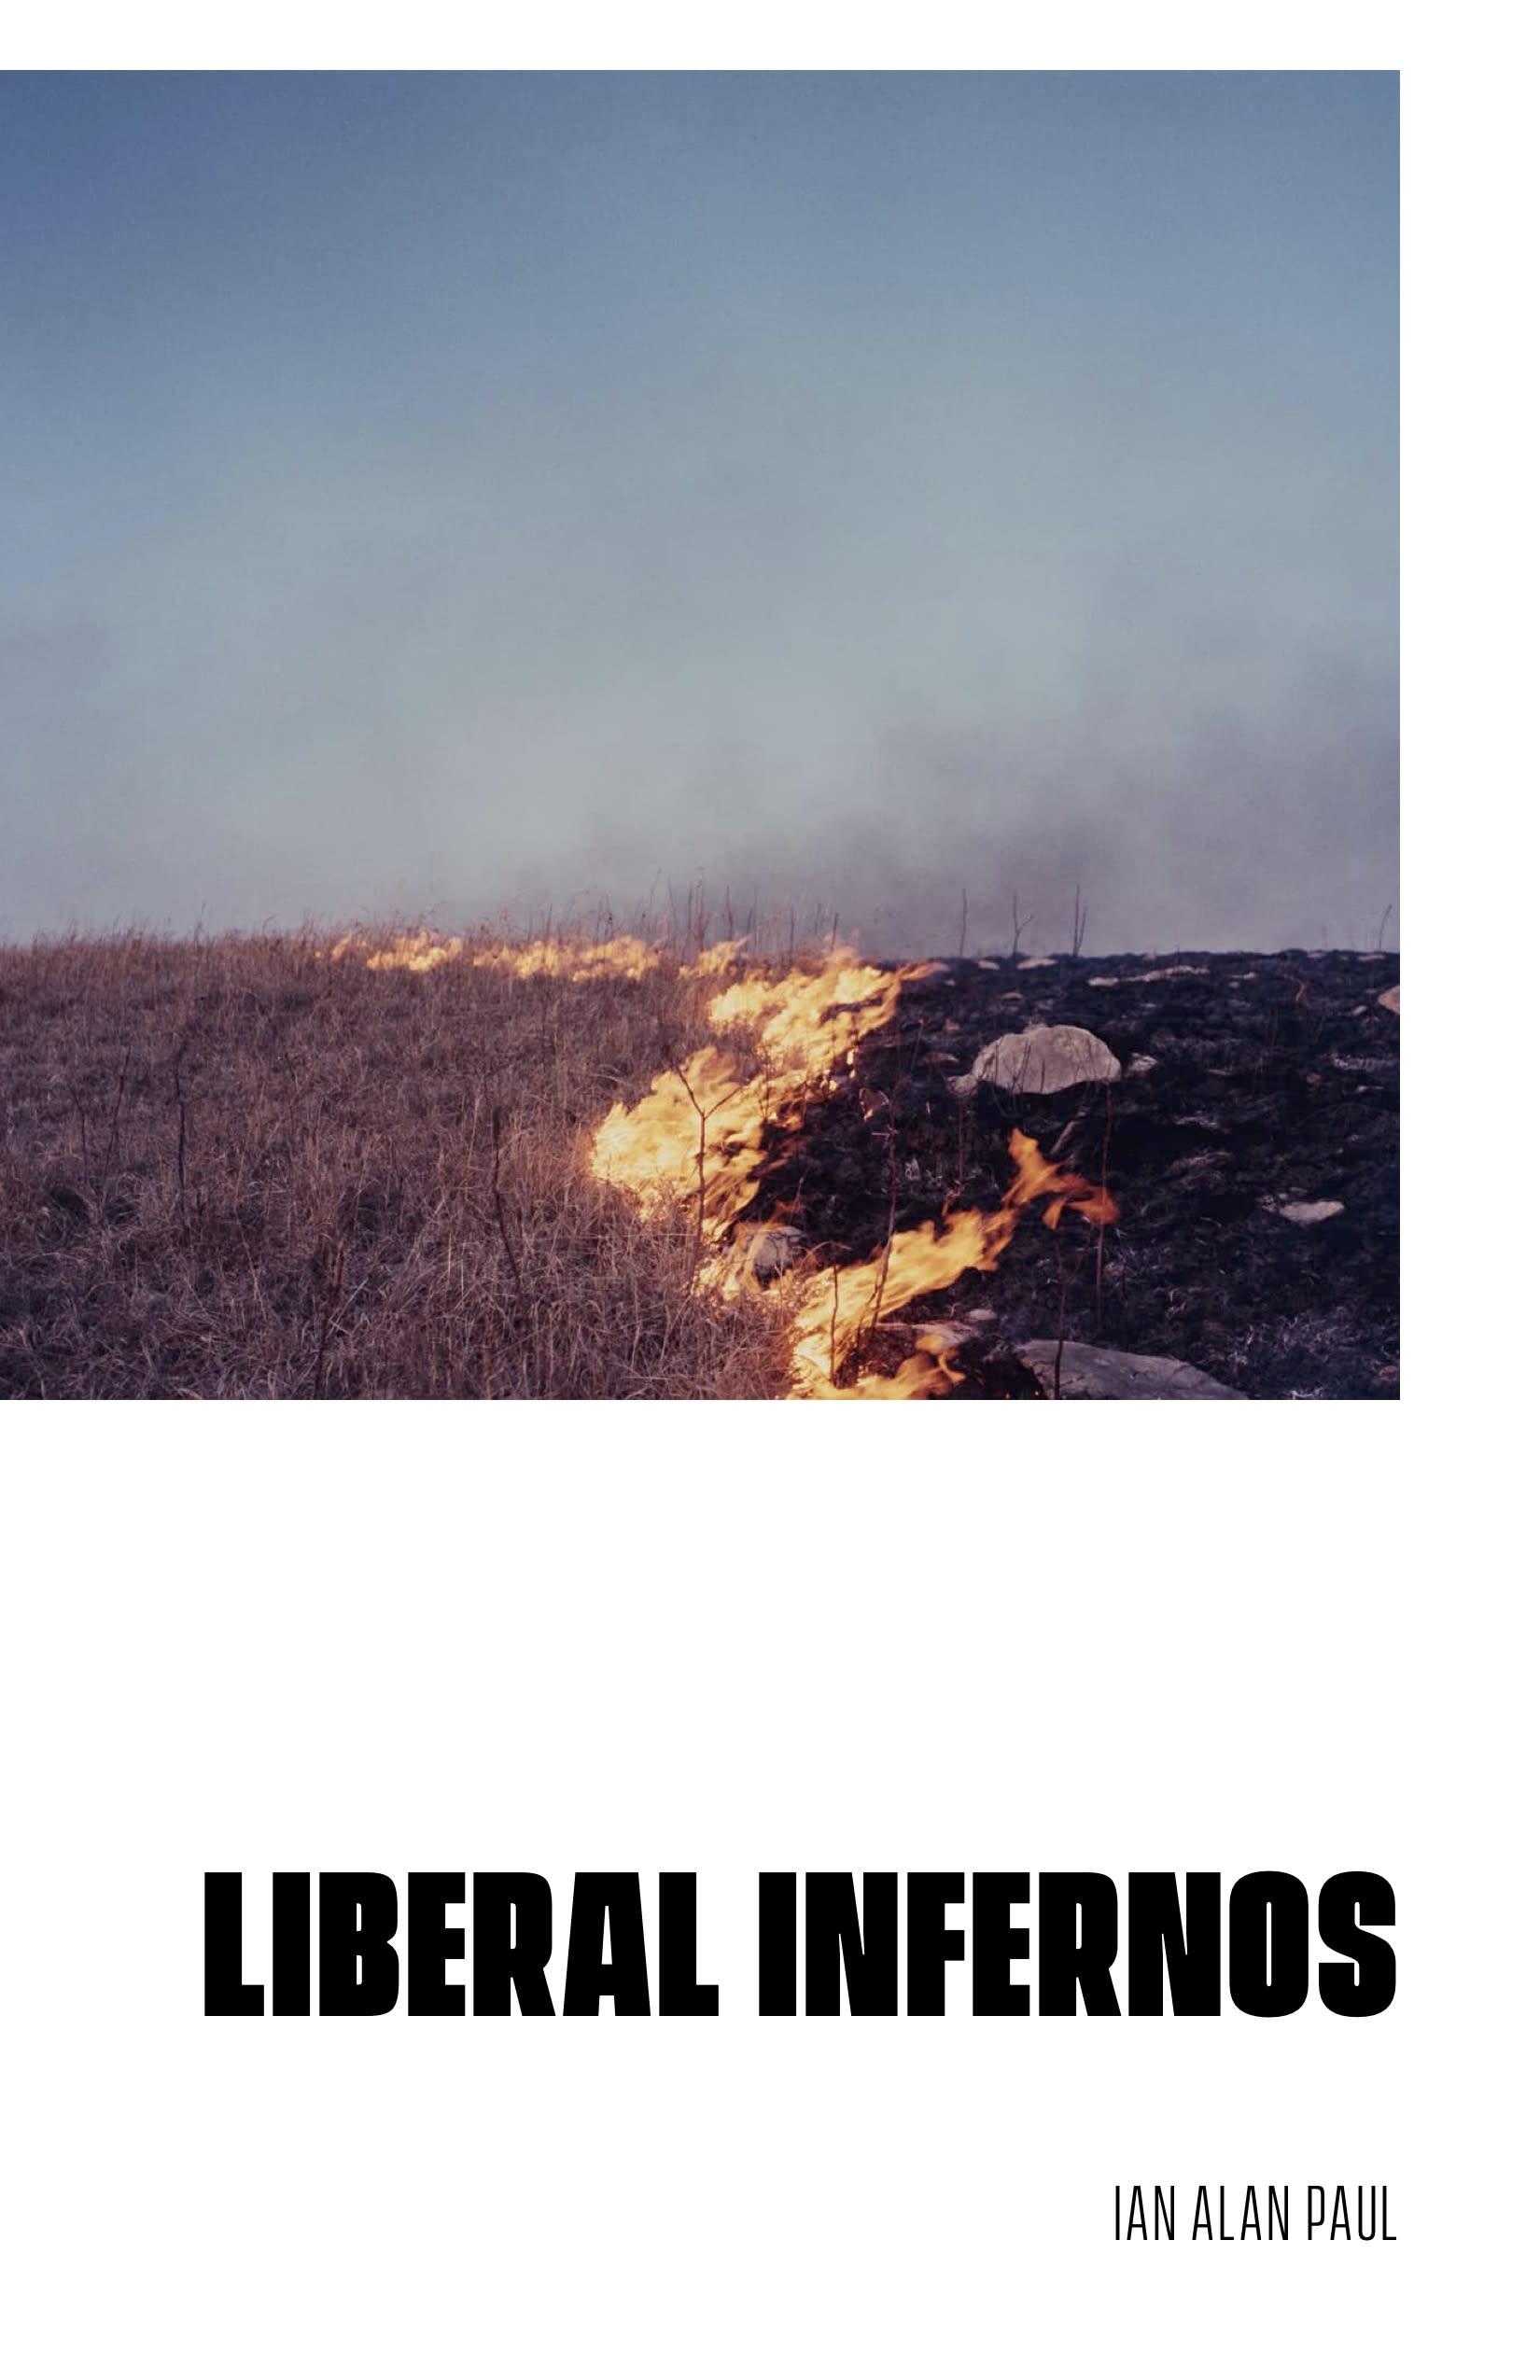 Cover Image for Liberal Infernos